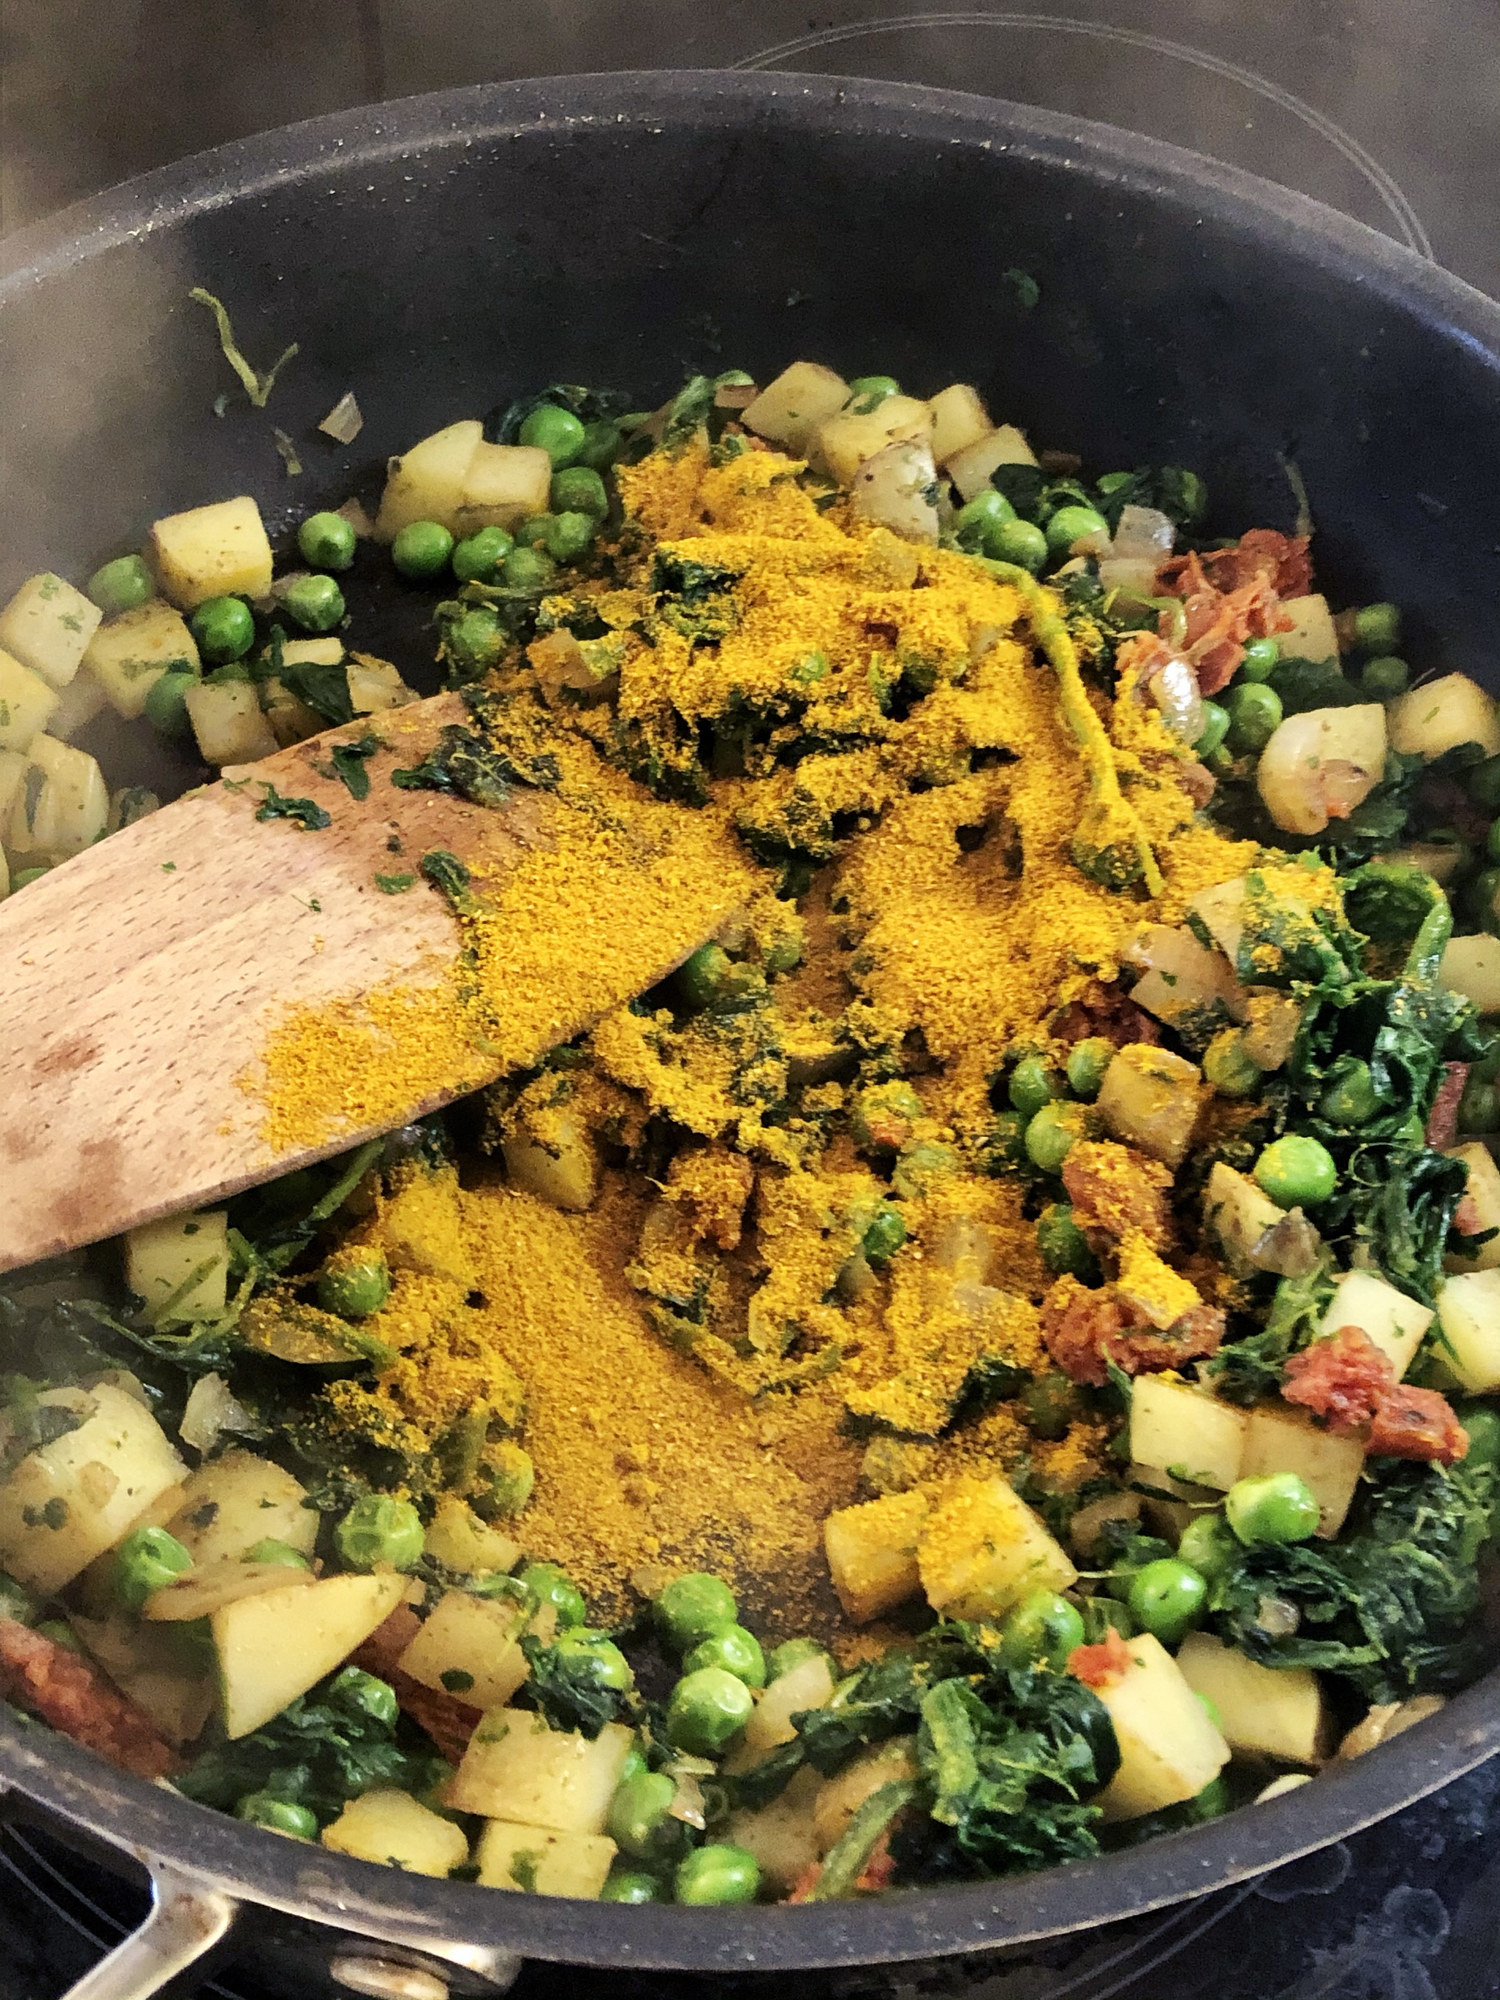 Garam masala on a bed of peas, kale, potatoes, and other vegetables